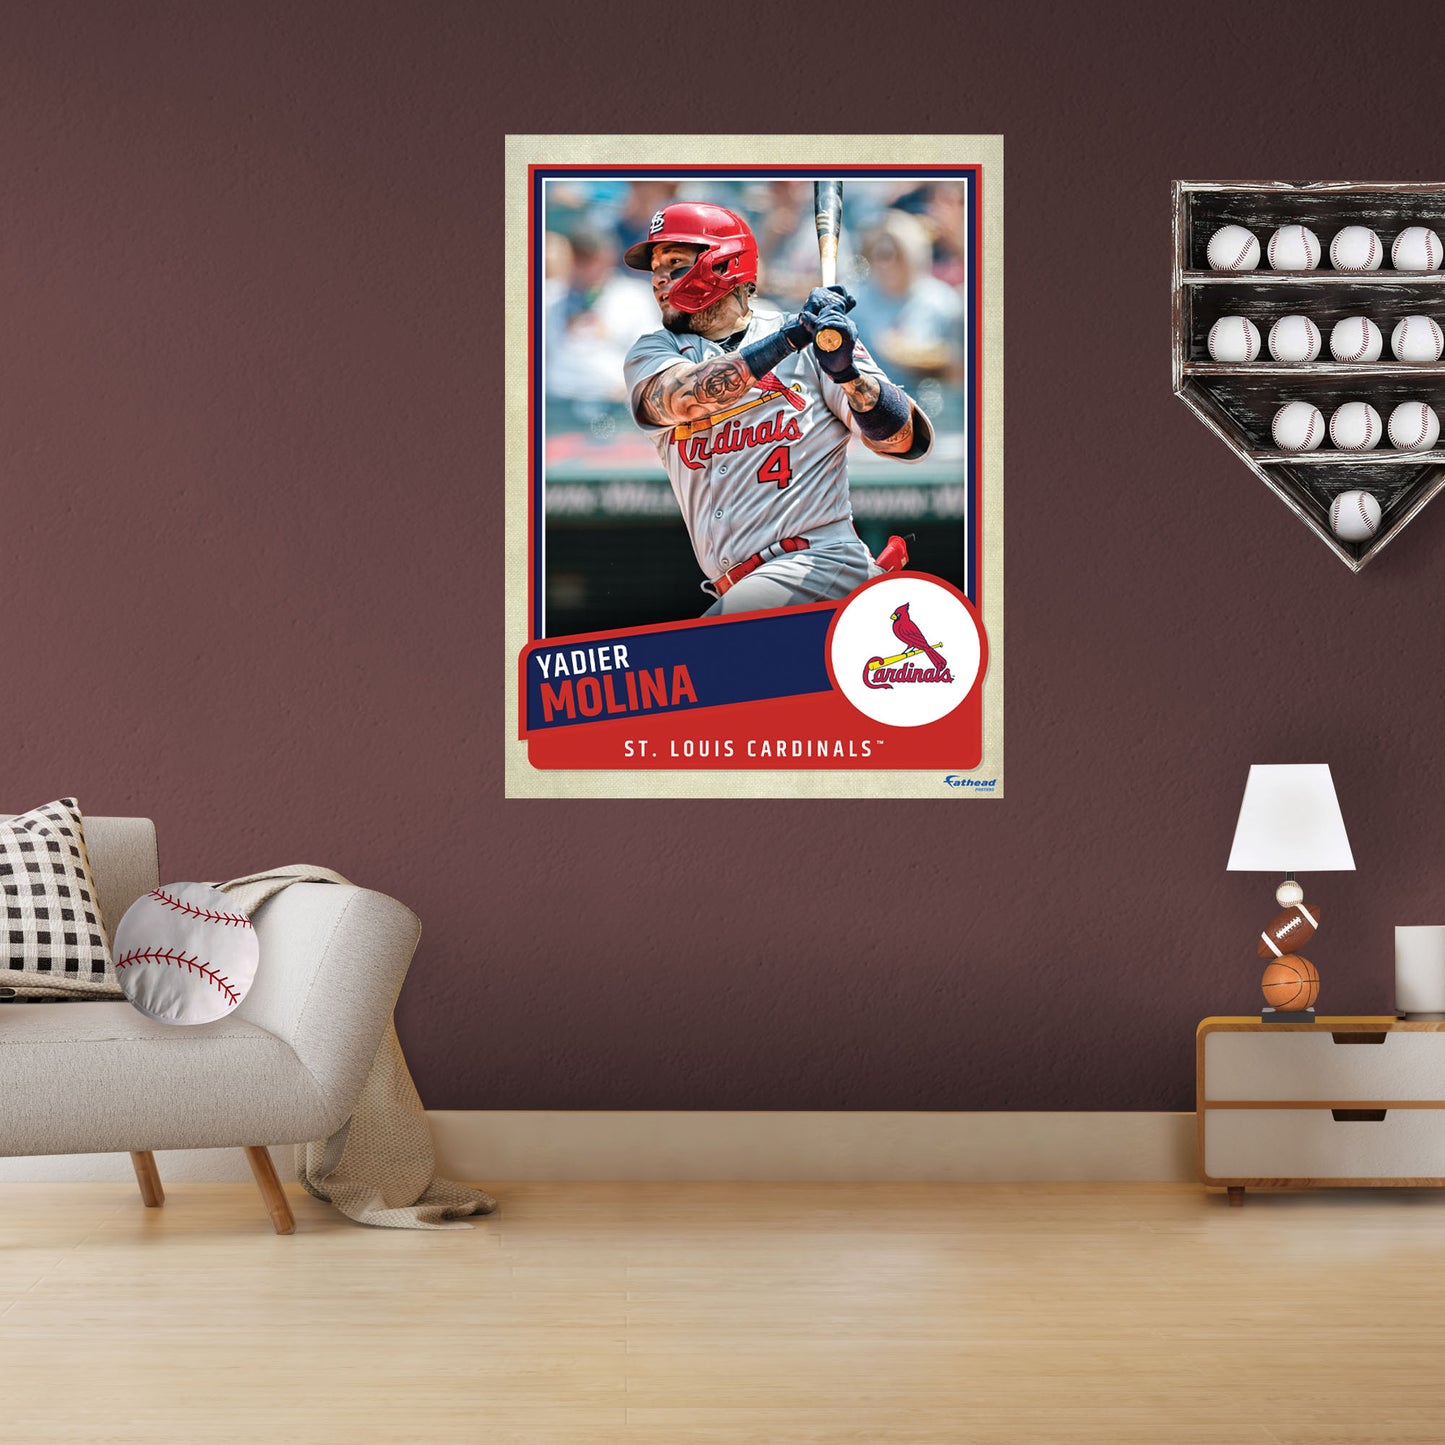 St. Louis Cardinals: Yadier Molina  Poster        - Officially Licensed MLB Removable     Adhesive Decal